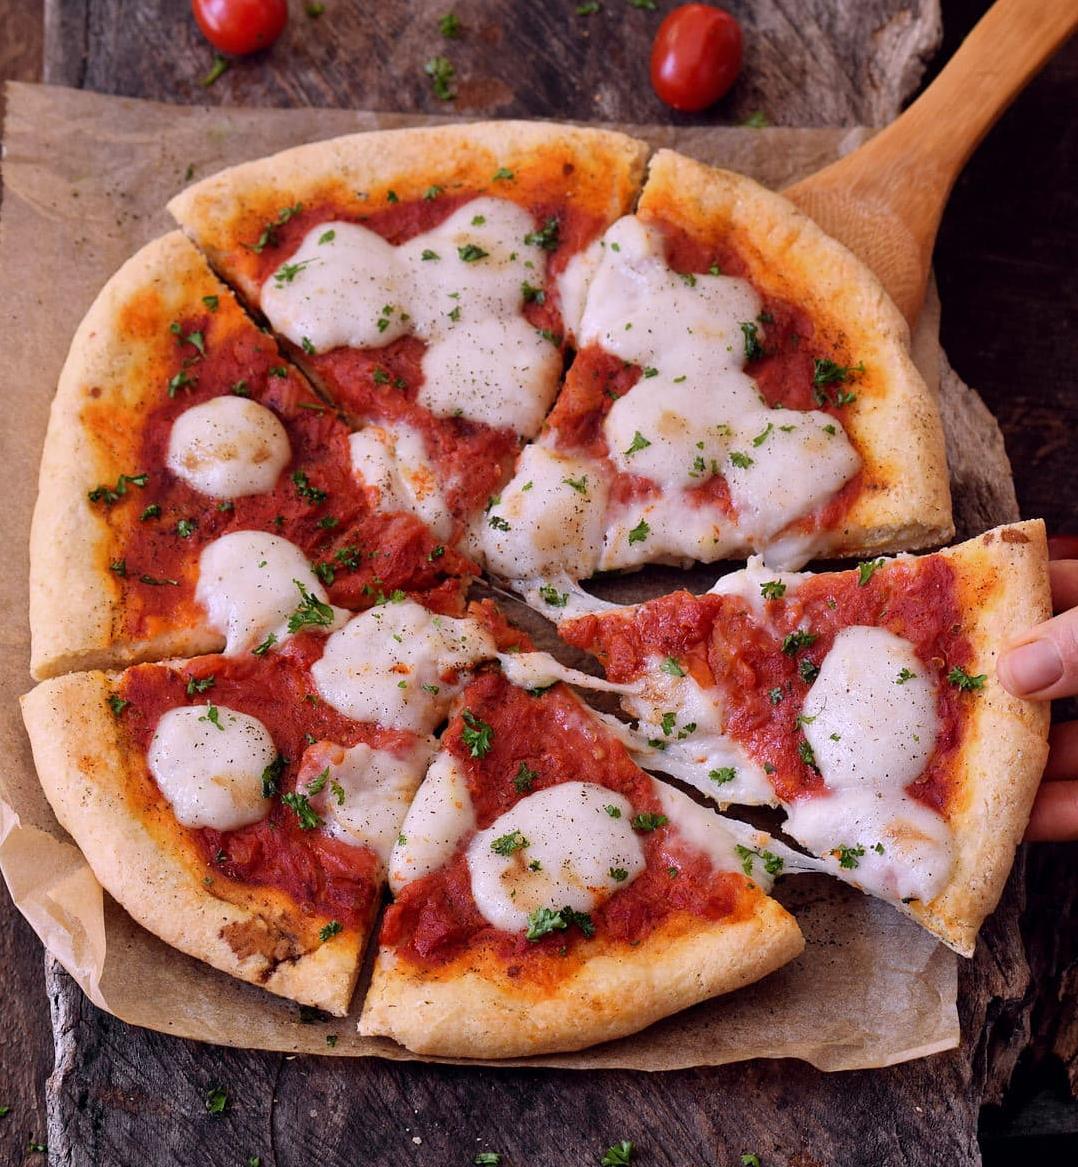  Finally, a gluten-free pizza dough recipe that doesn't turn out soggy or bland!